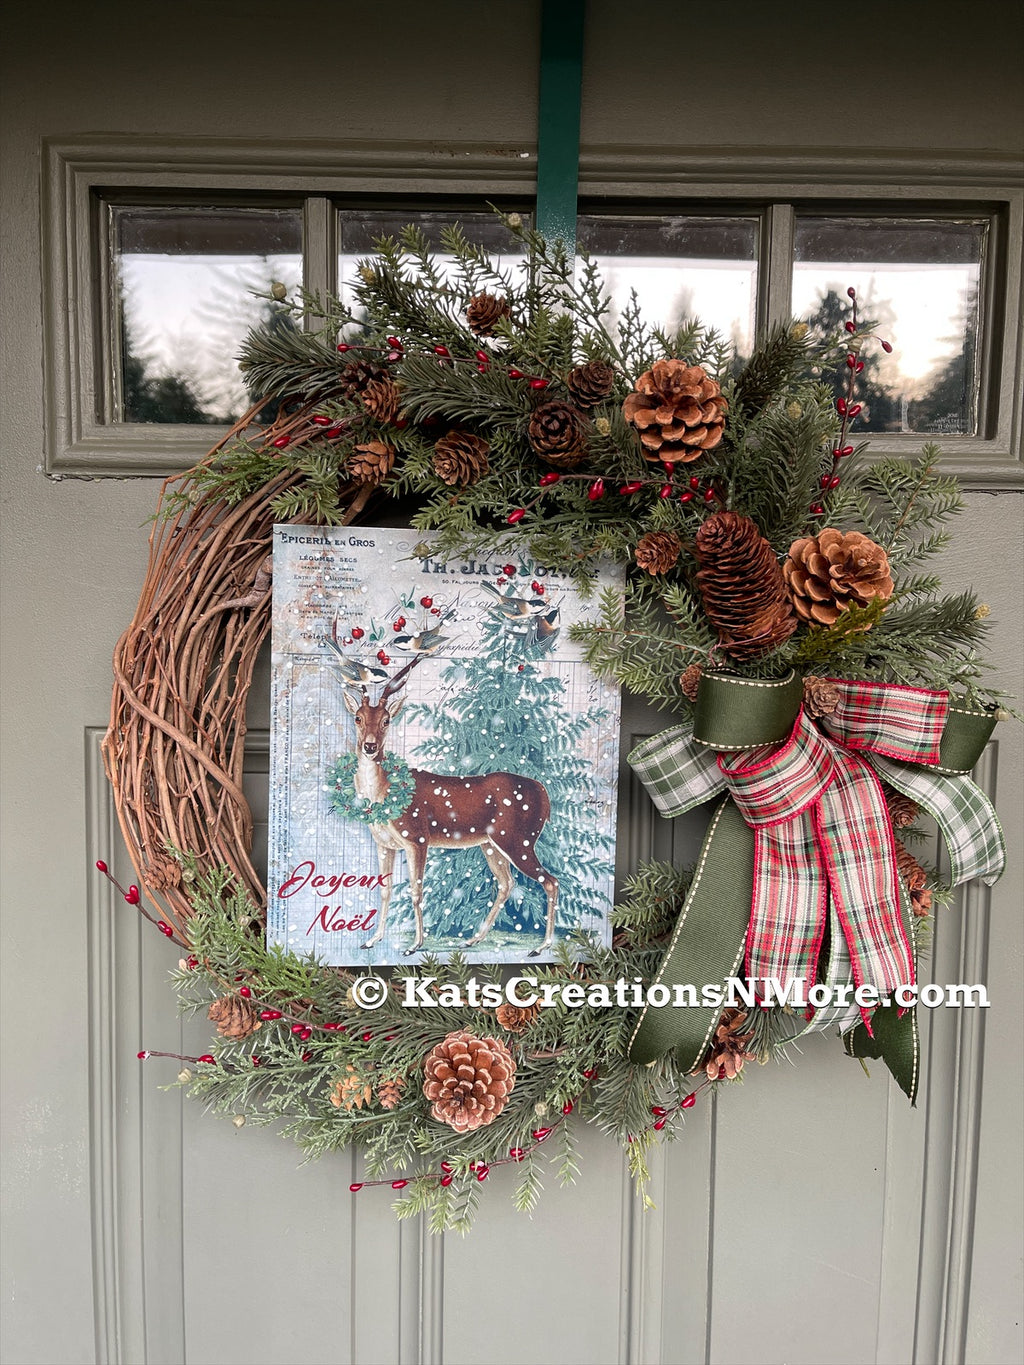 Winter Deer Grapevine Pine and Pine Cones Wreath with a Red, White and Green Bow on a Green Door